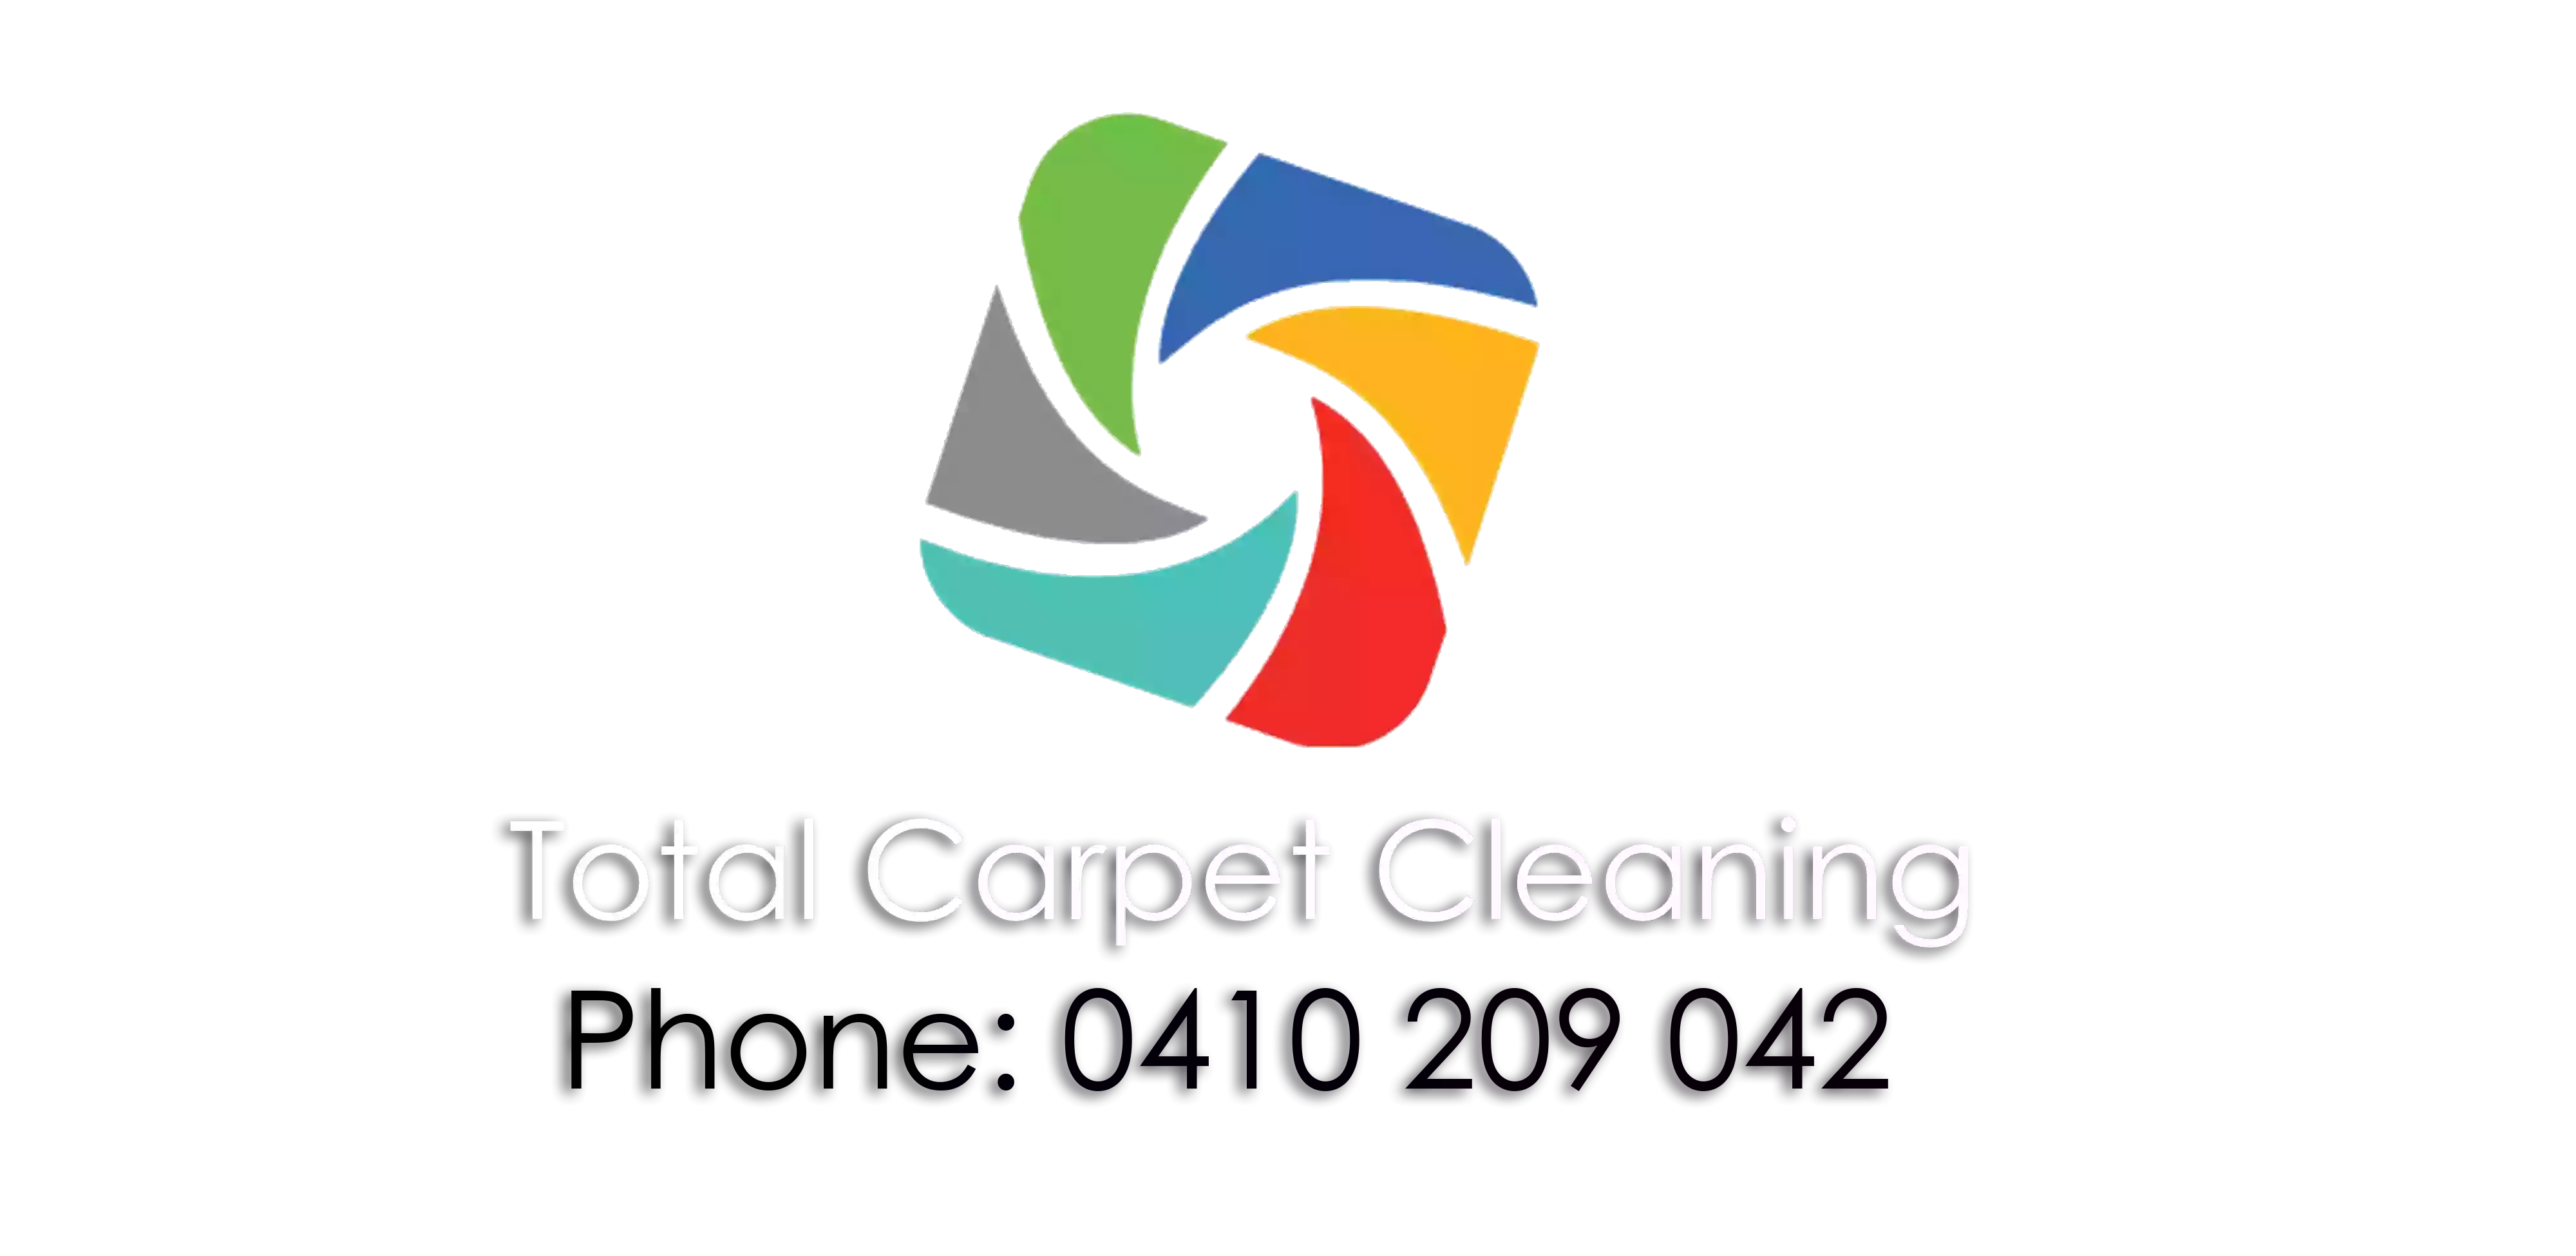 Total Carpet Cleaning